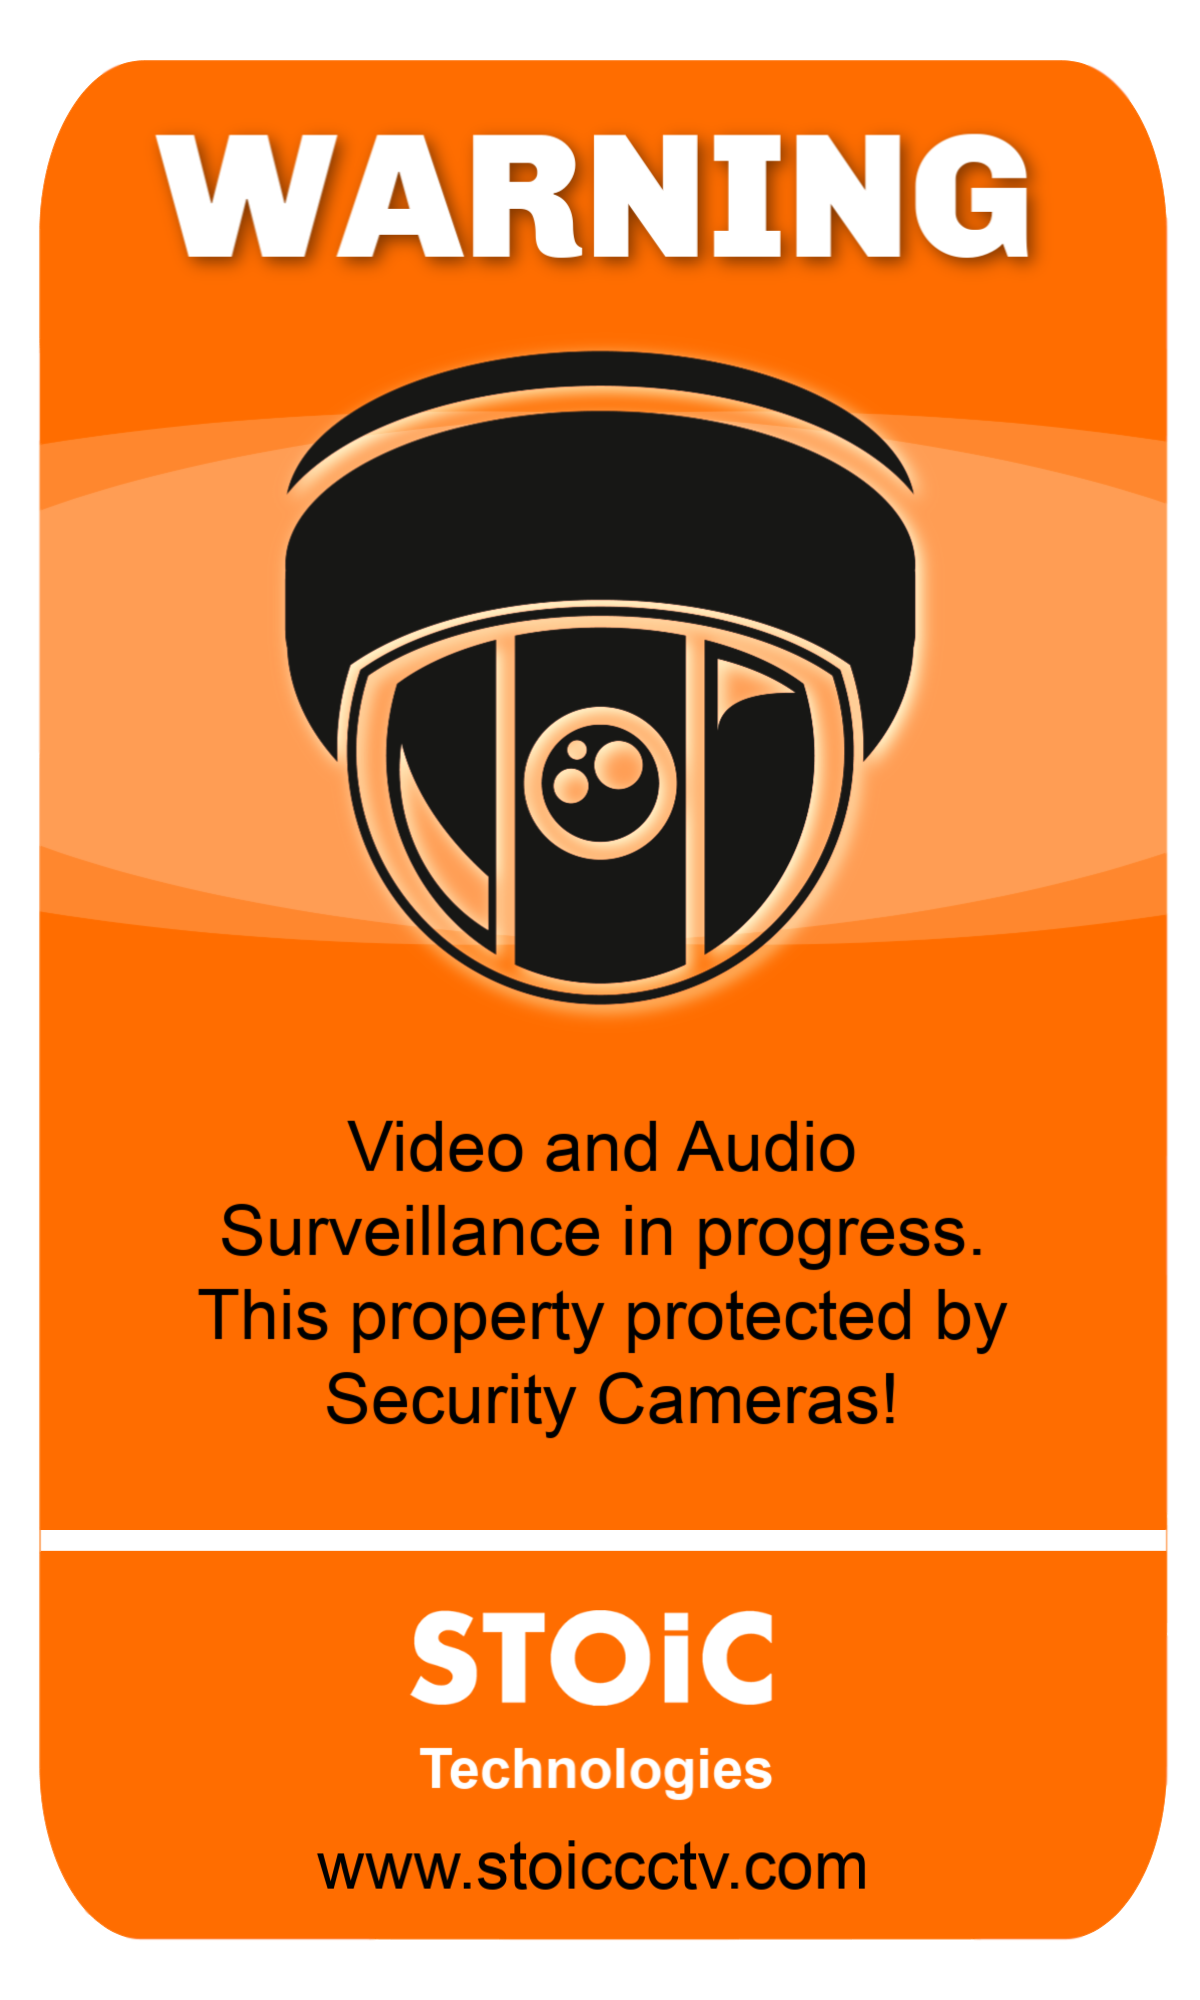 Sticker Pack of 4-150mm x 50mm Camera MISC3 CCTV Sign Security Warning 